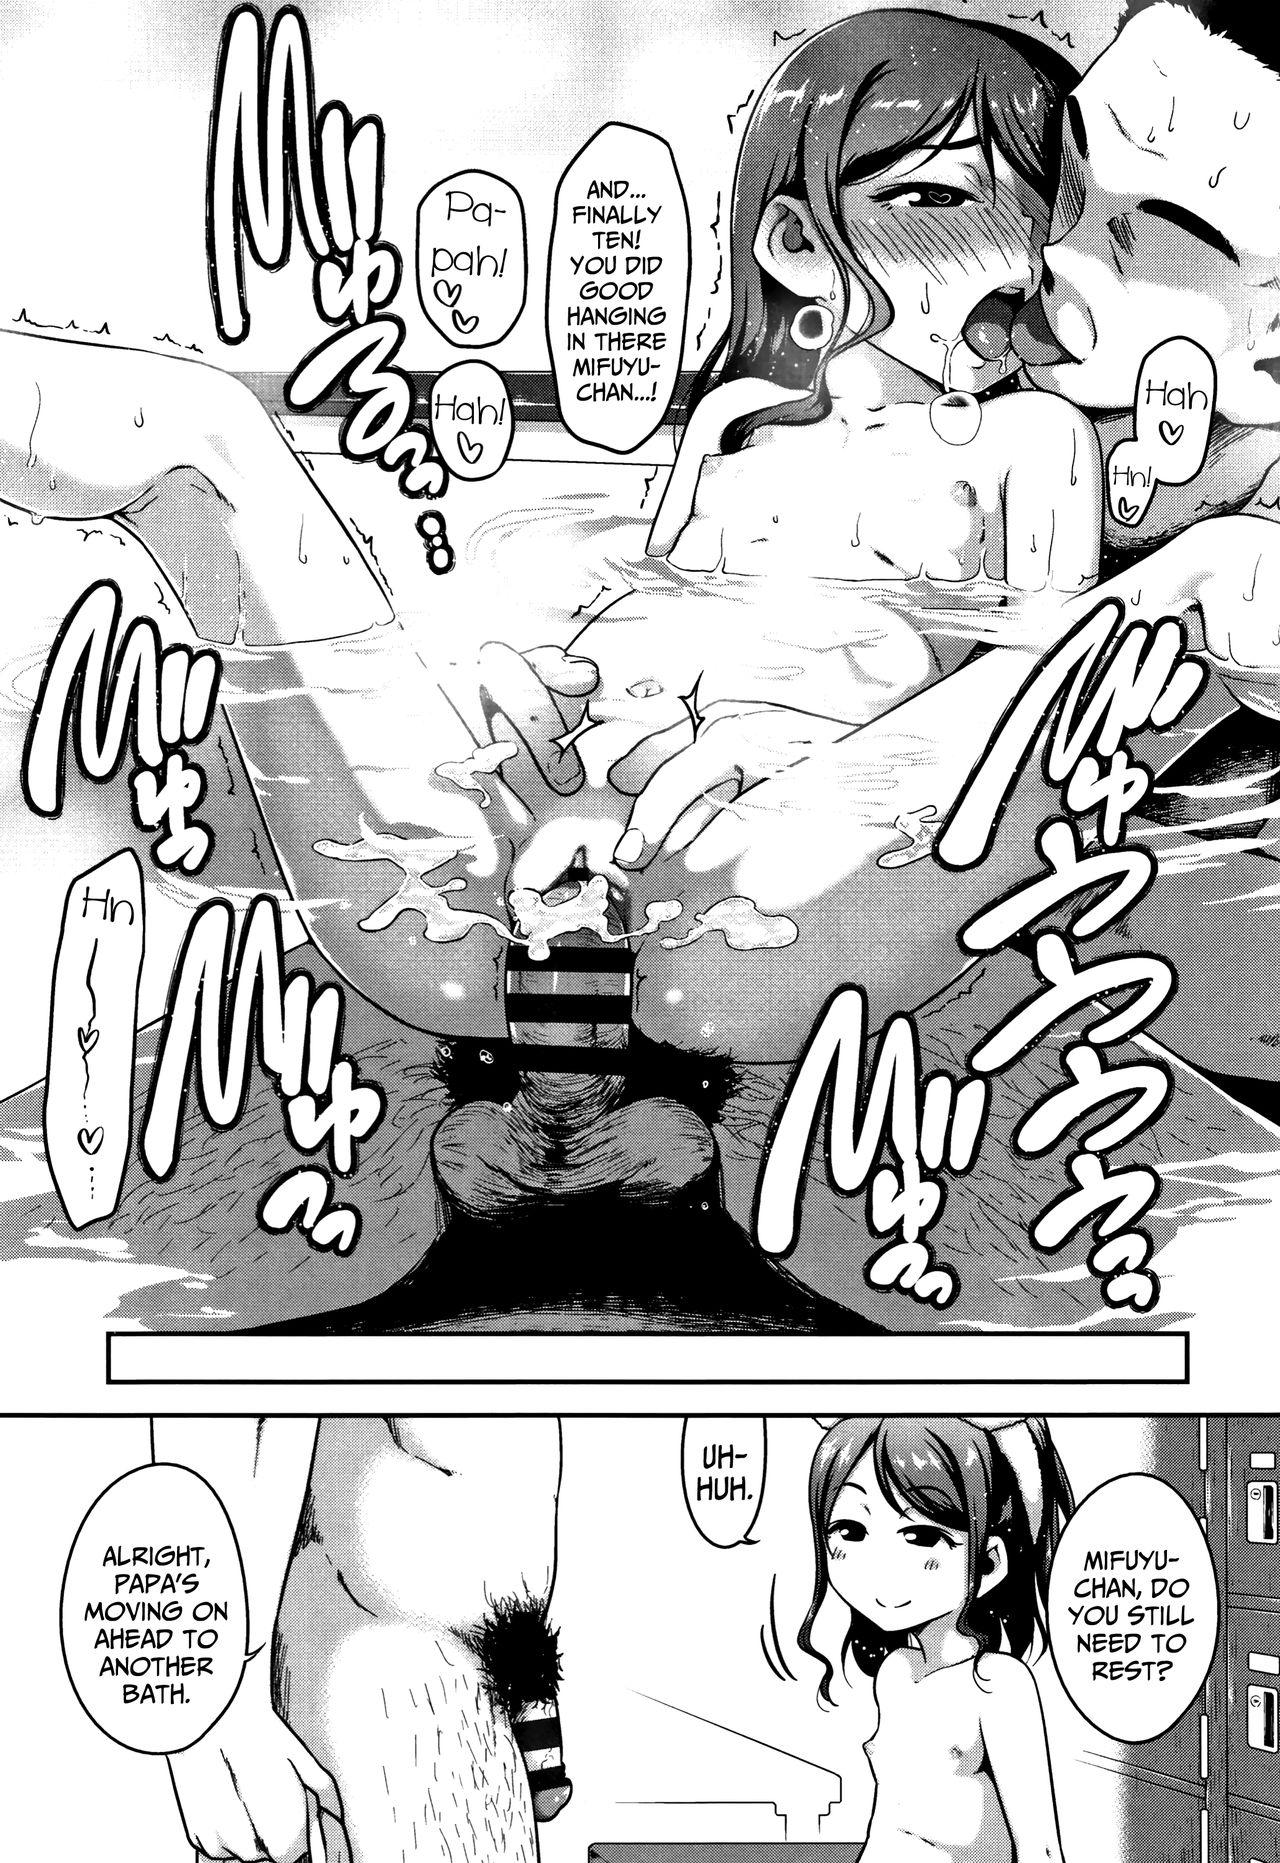 Francais Chichiko Janai no ka... | We're Father and Daughter, Aren't we...? Selfie - Page 21